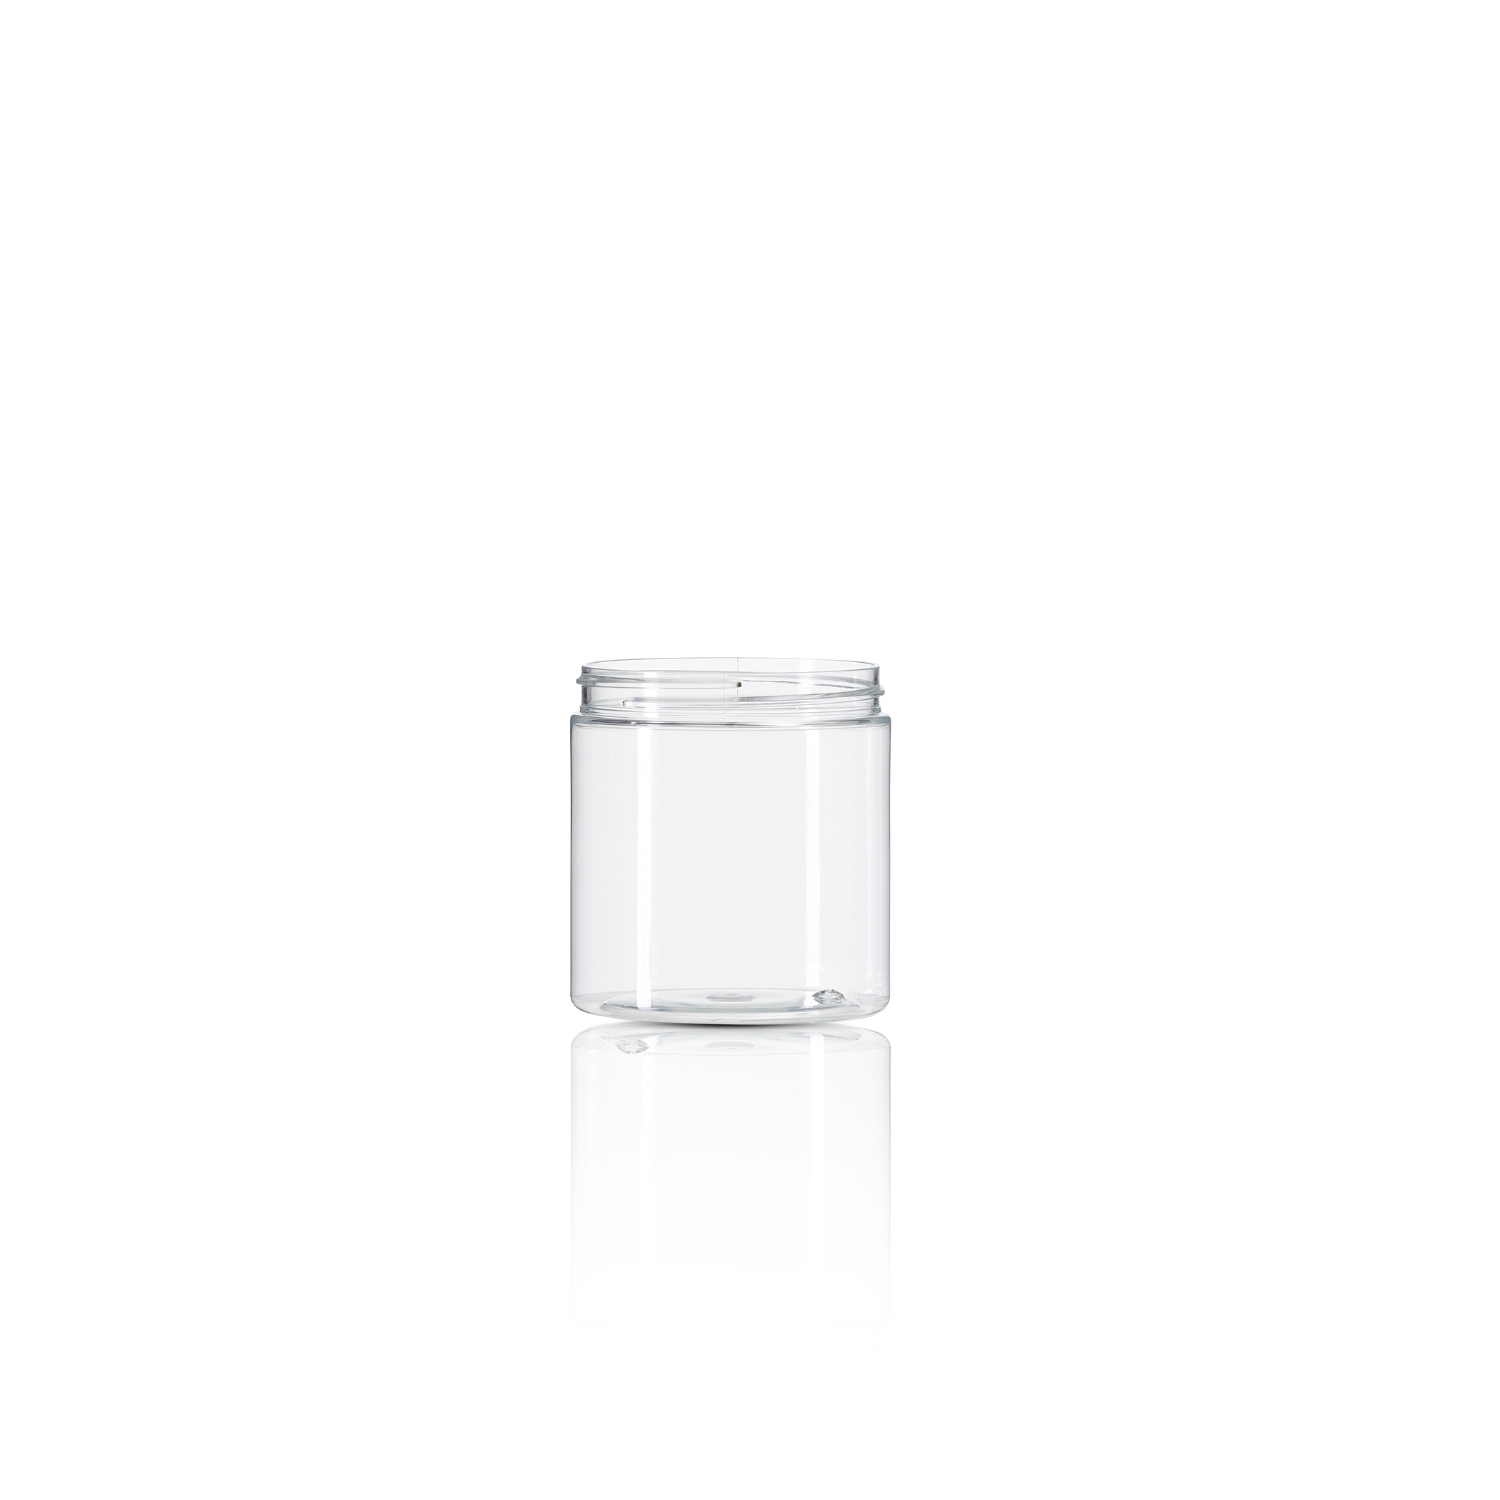 250ml Clear PET Straight-Sided Jar - 70/400 neck